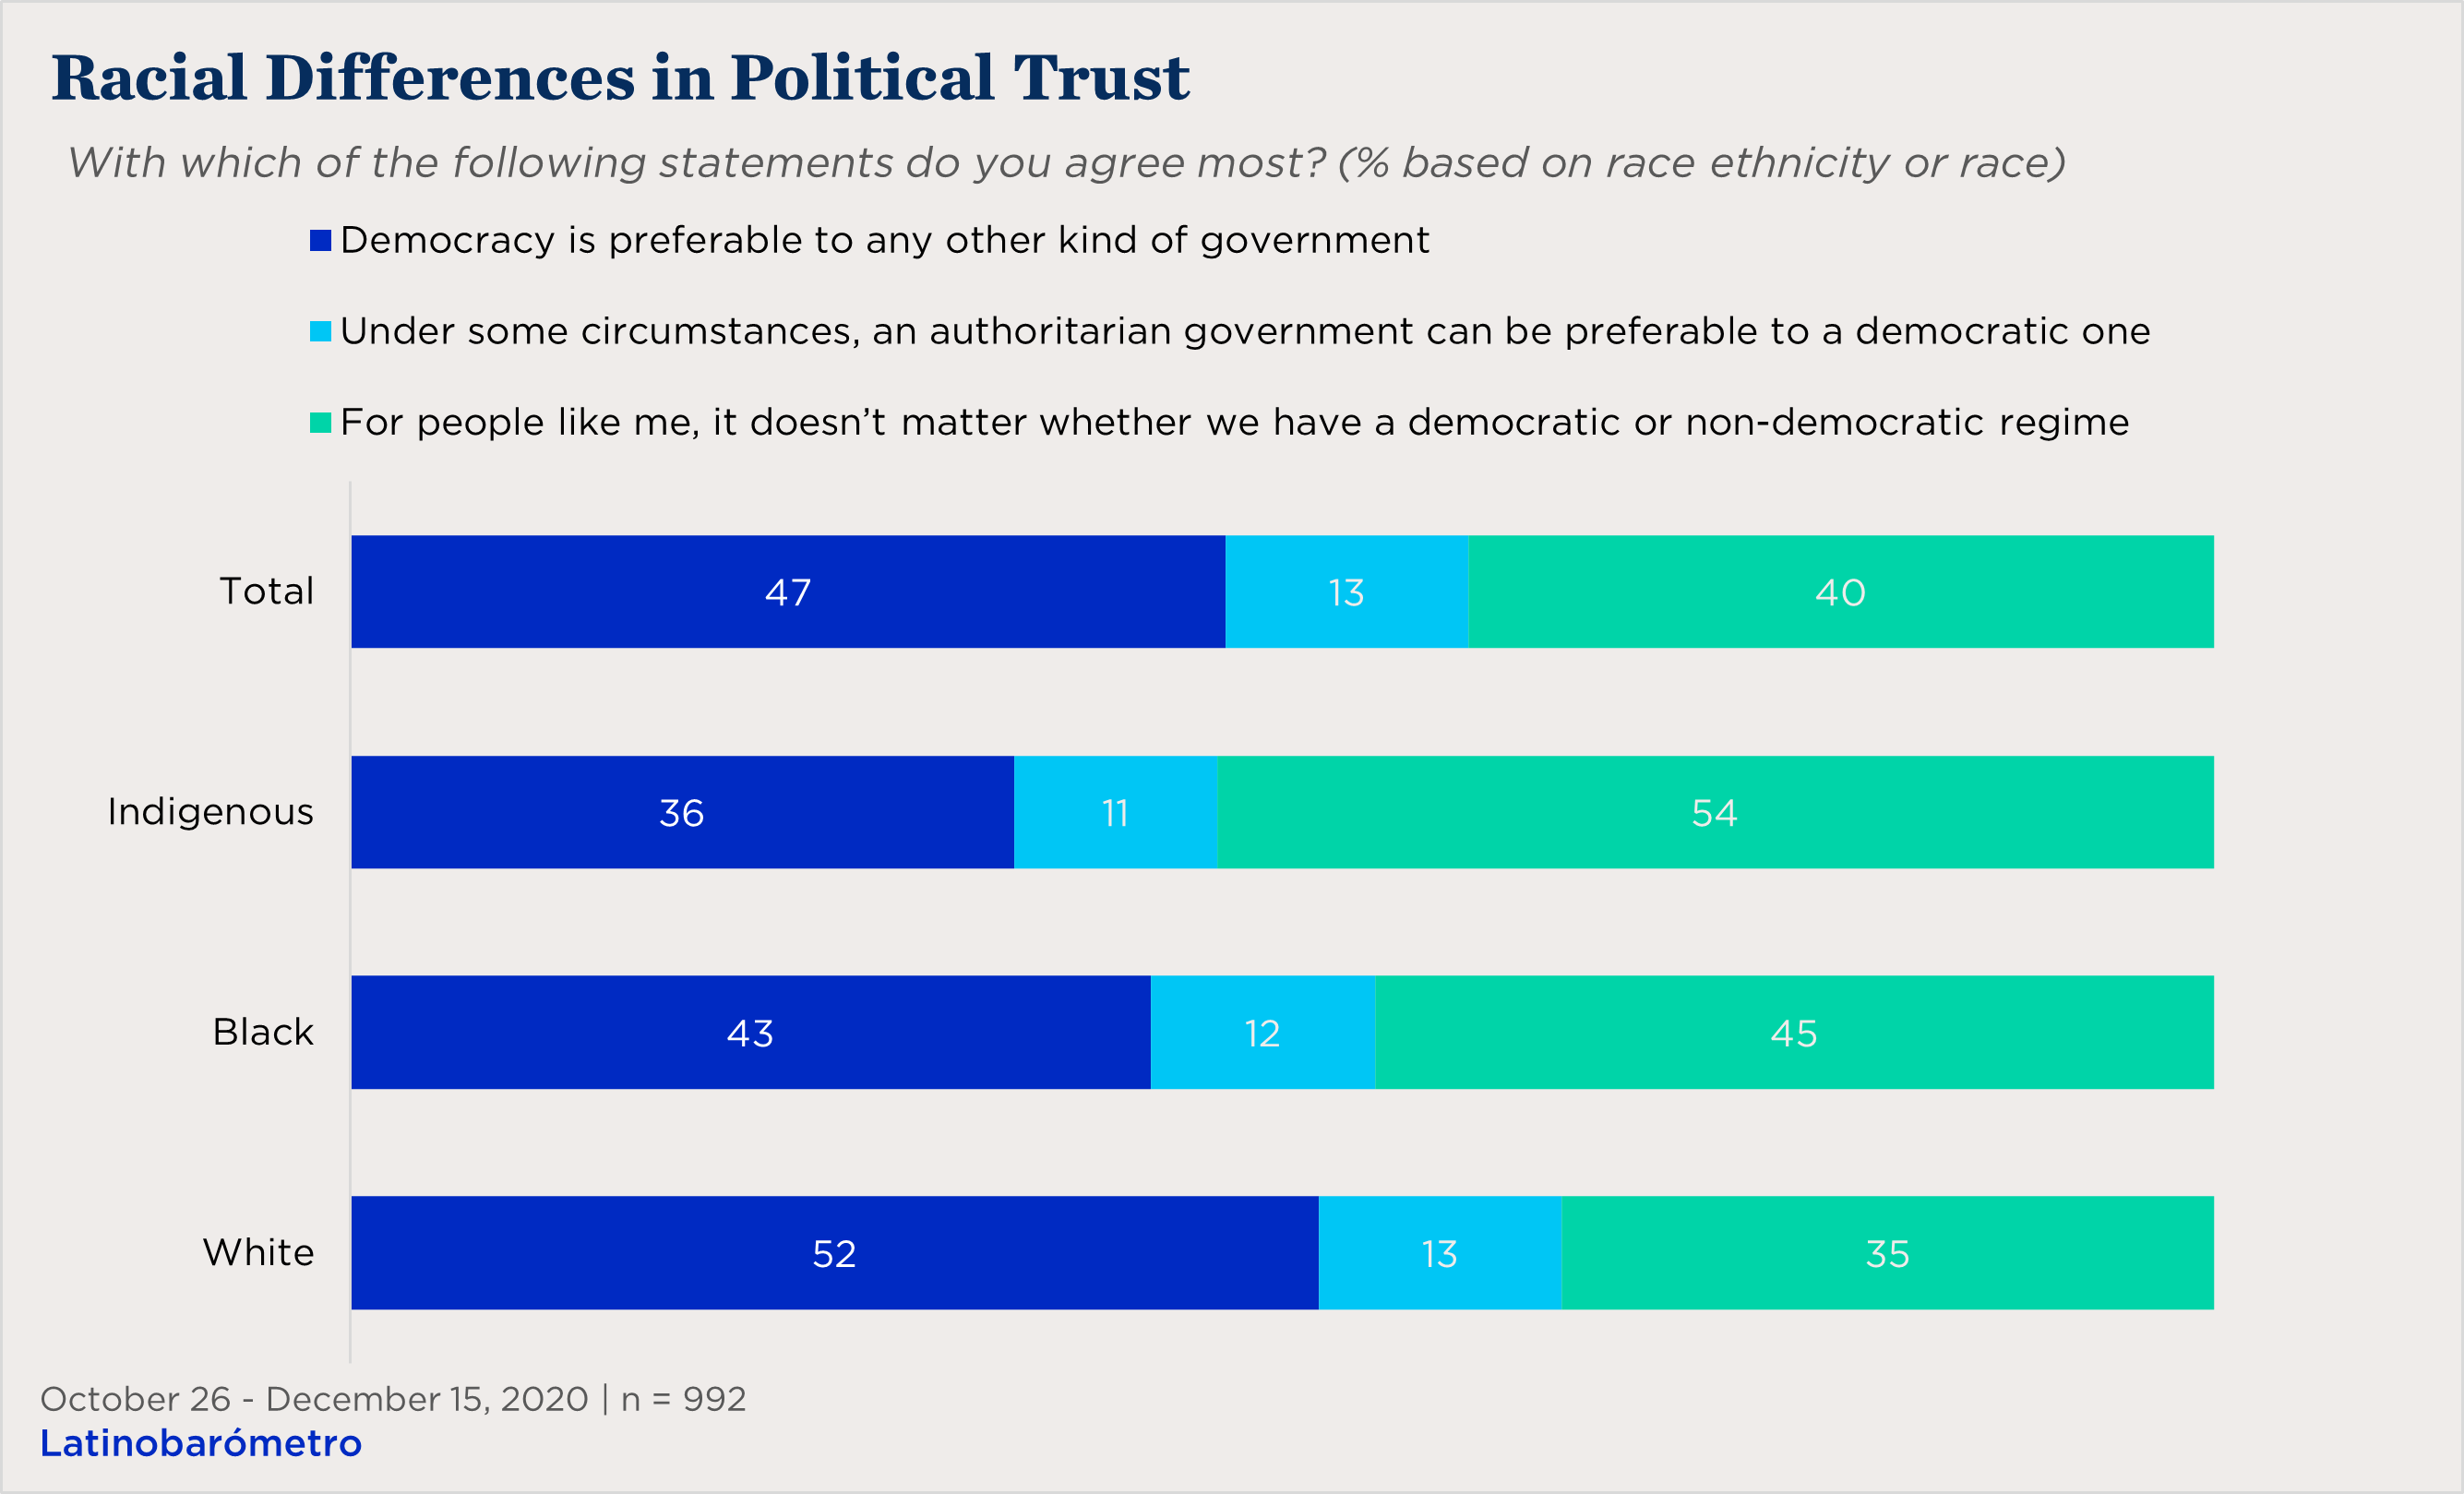 "line chart showing racial differences in political trust"